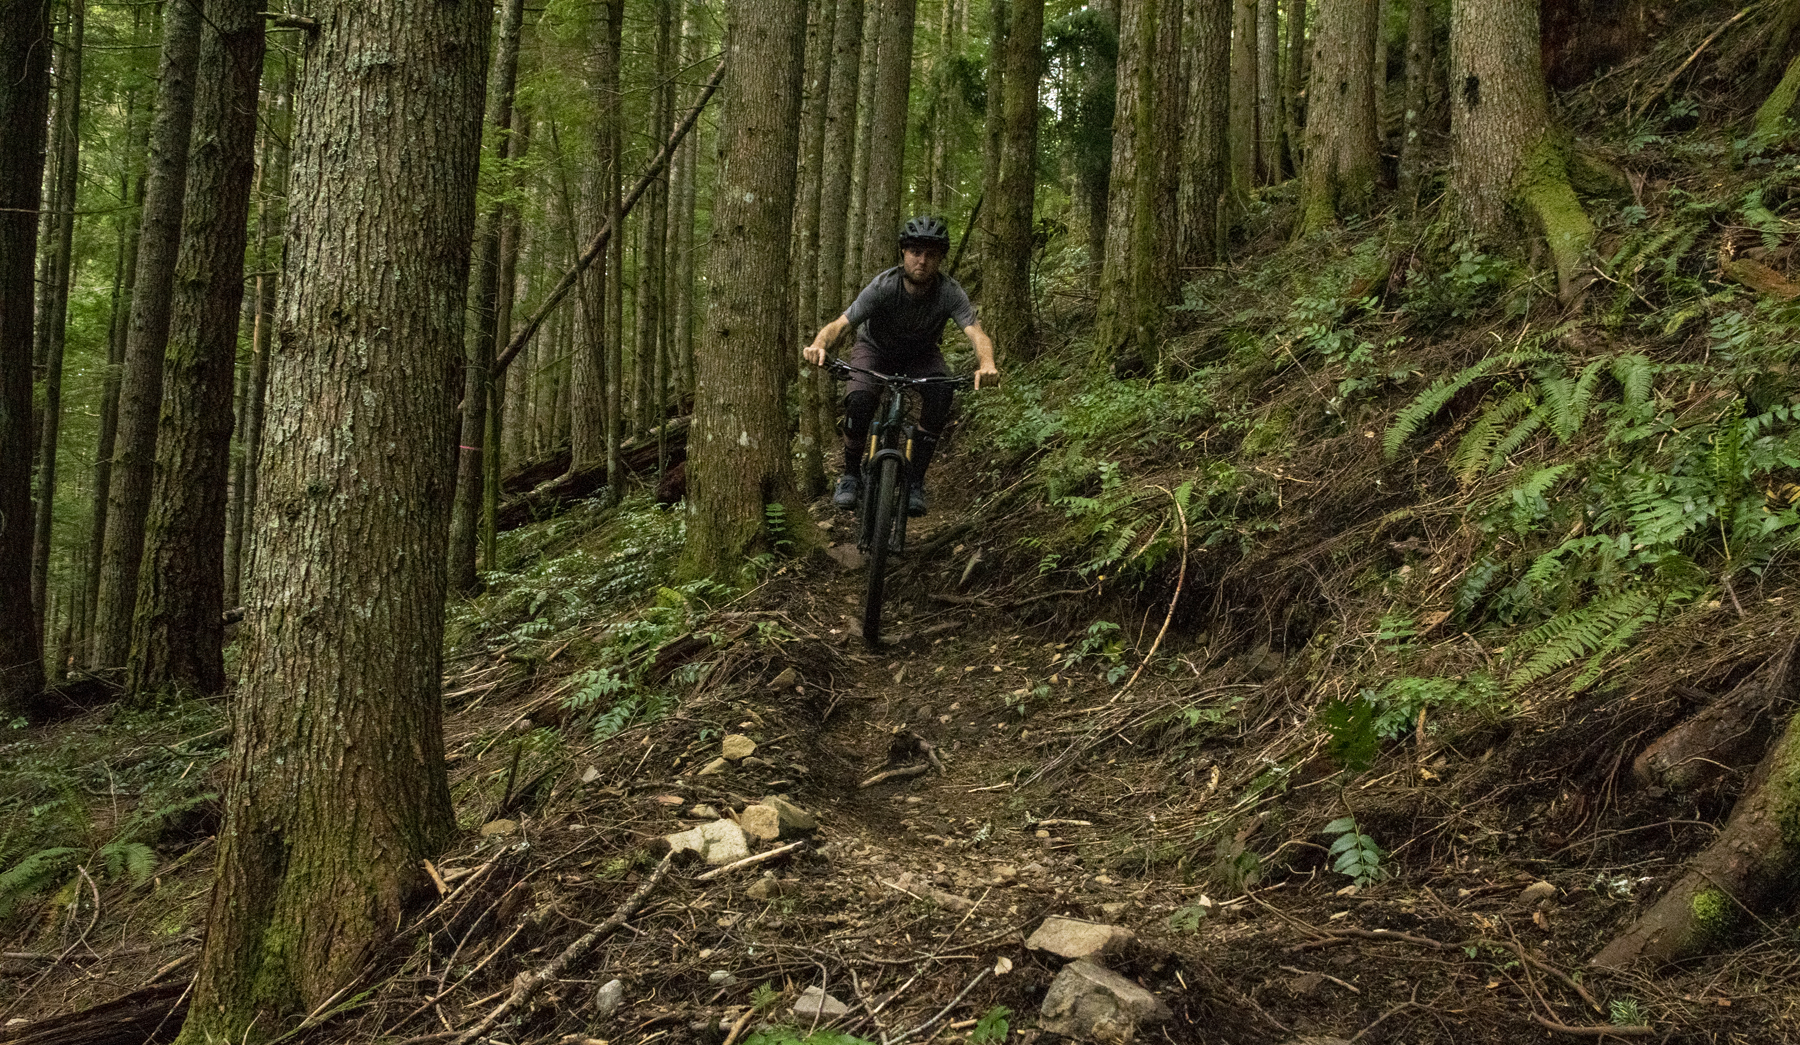 David Golay and Zack Henderson review the Orbea Rallon for Blister